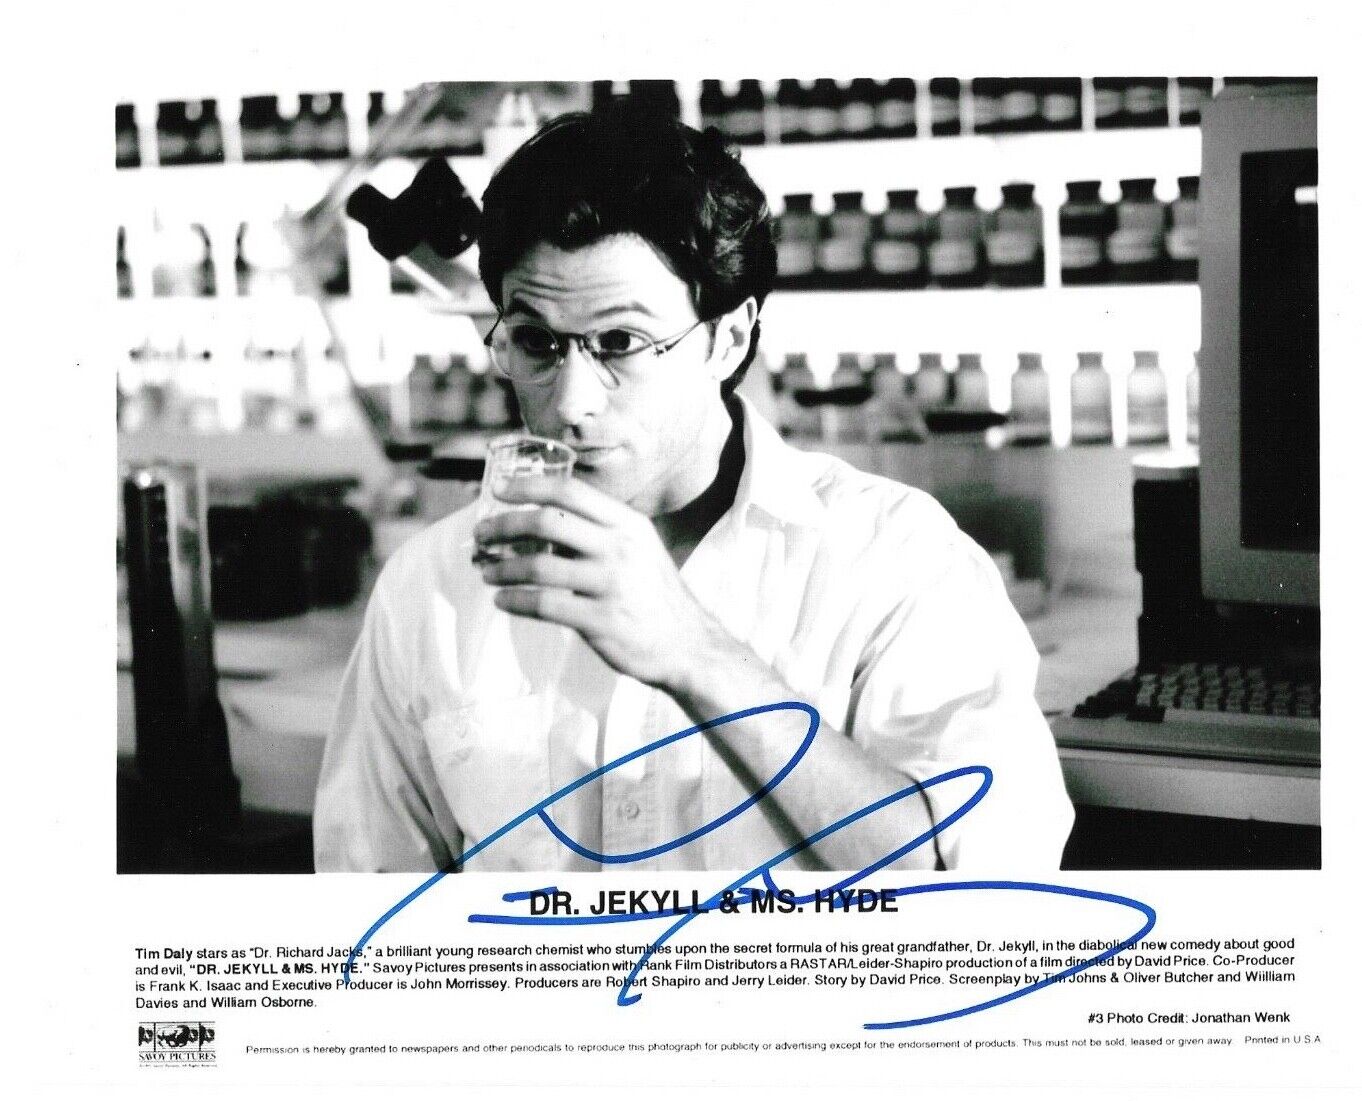 * TIM DALY * signed autographed 8x10 Photo Poster painting * DR. JEKYLL & MS. HYDE * 1